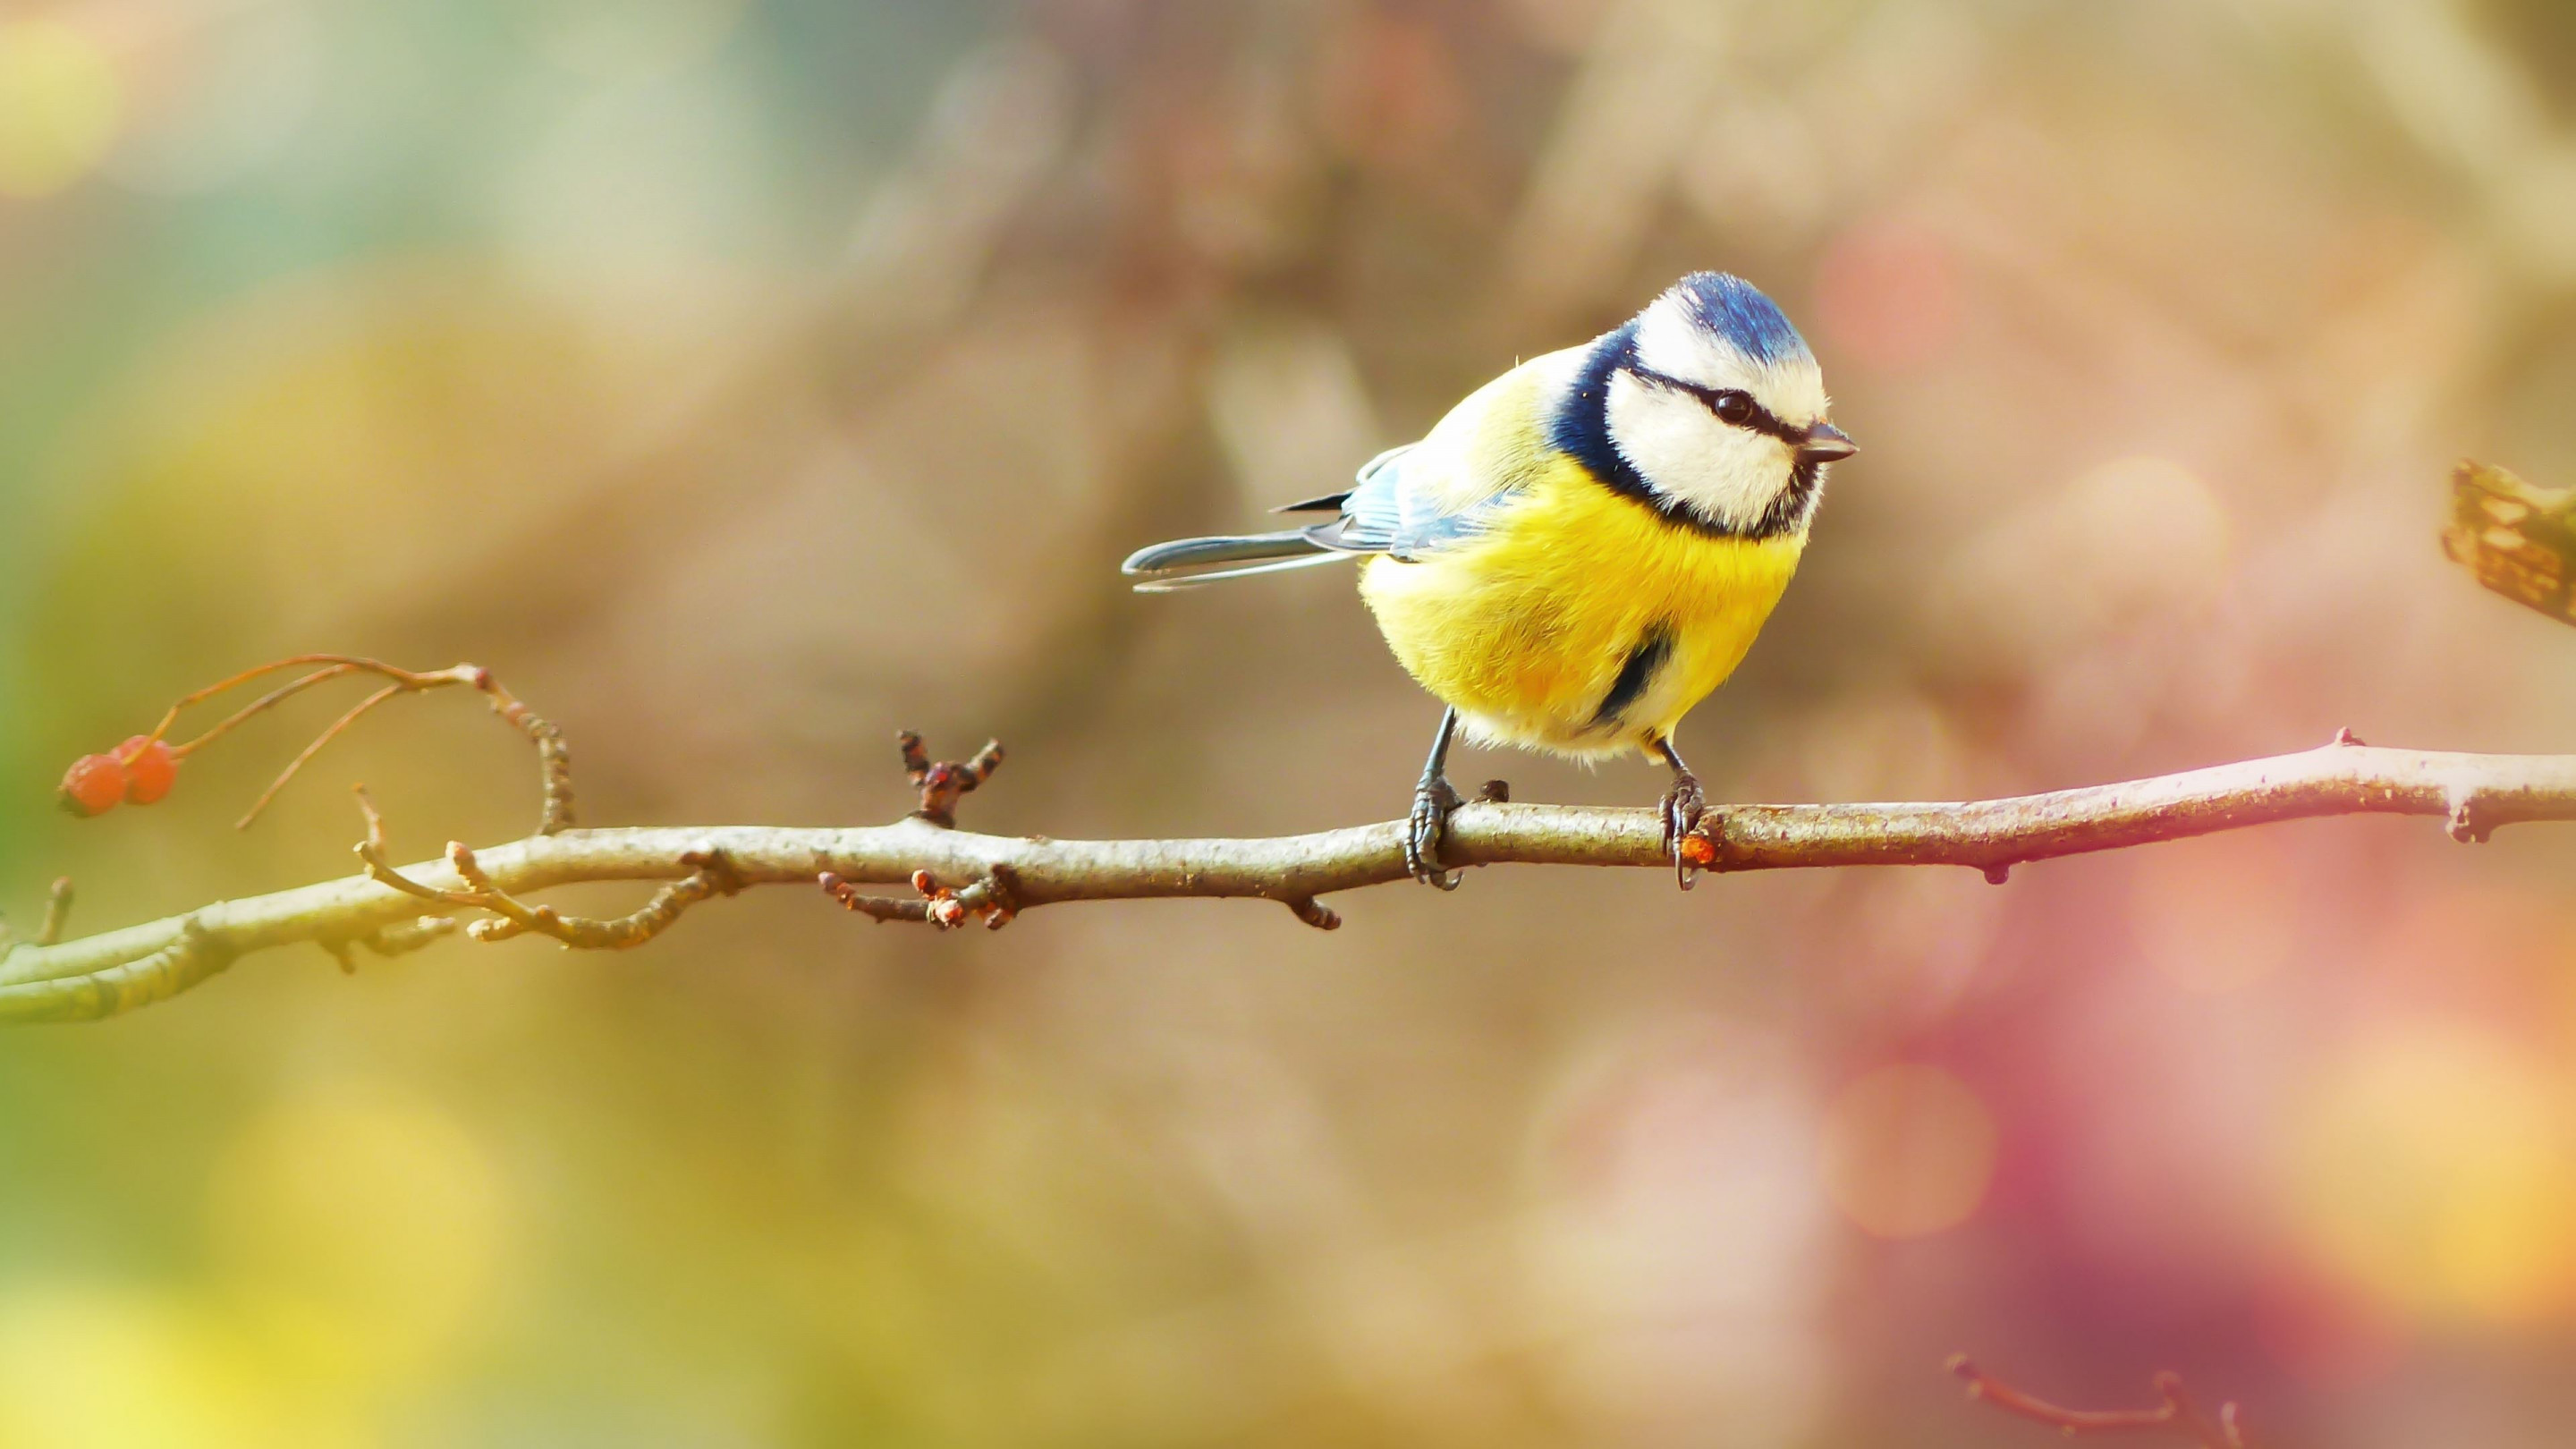 Crested Tit wallpaper 2880x1620